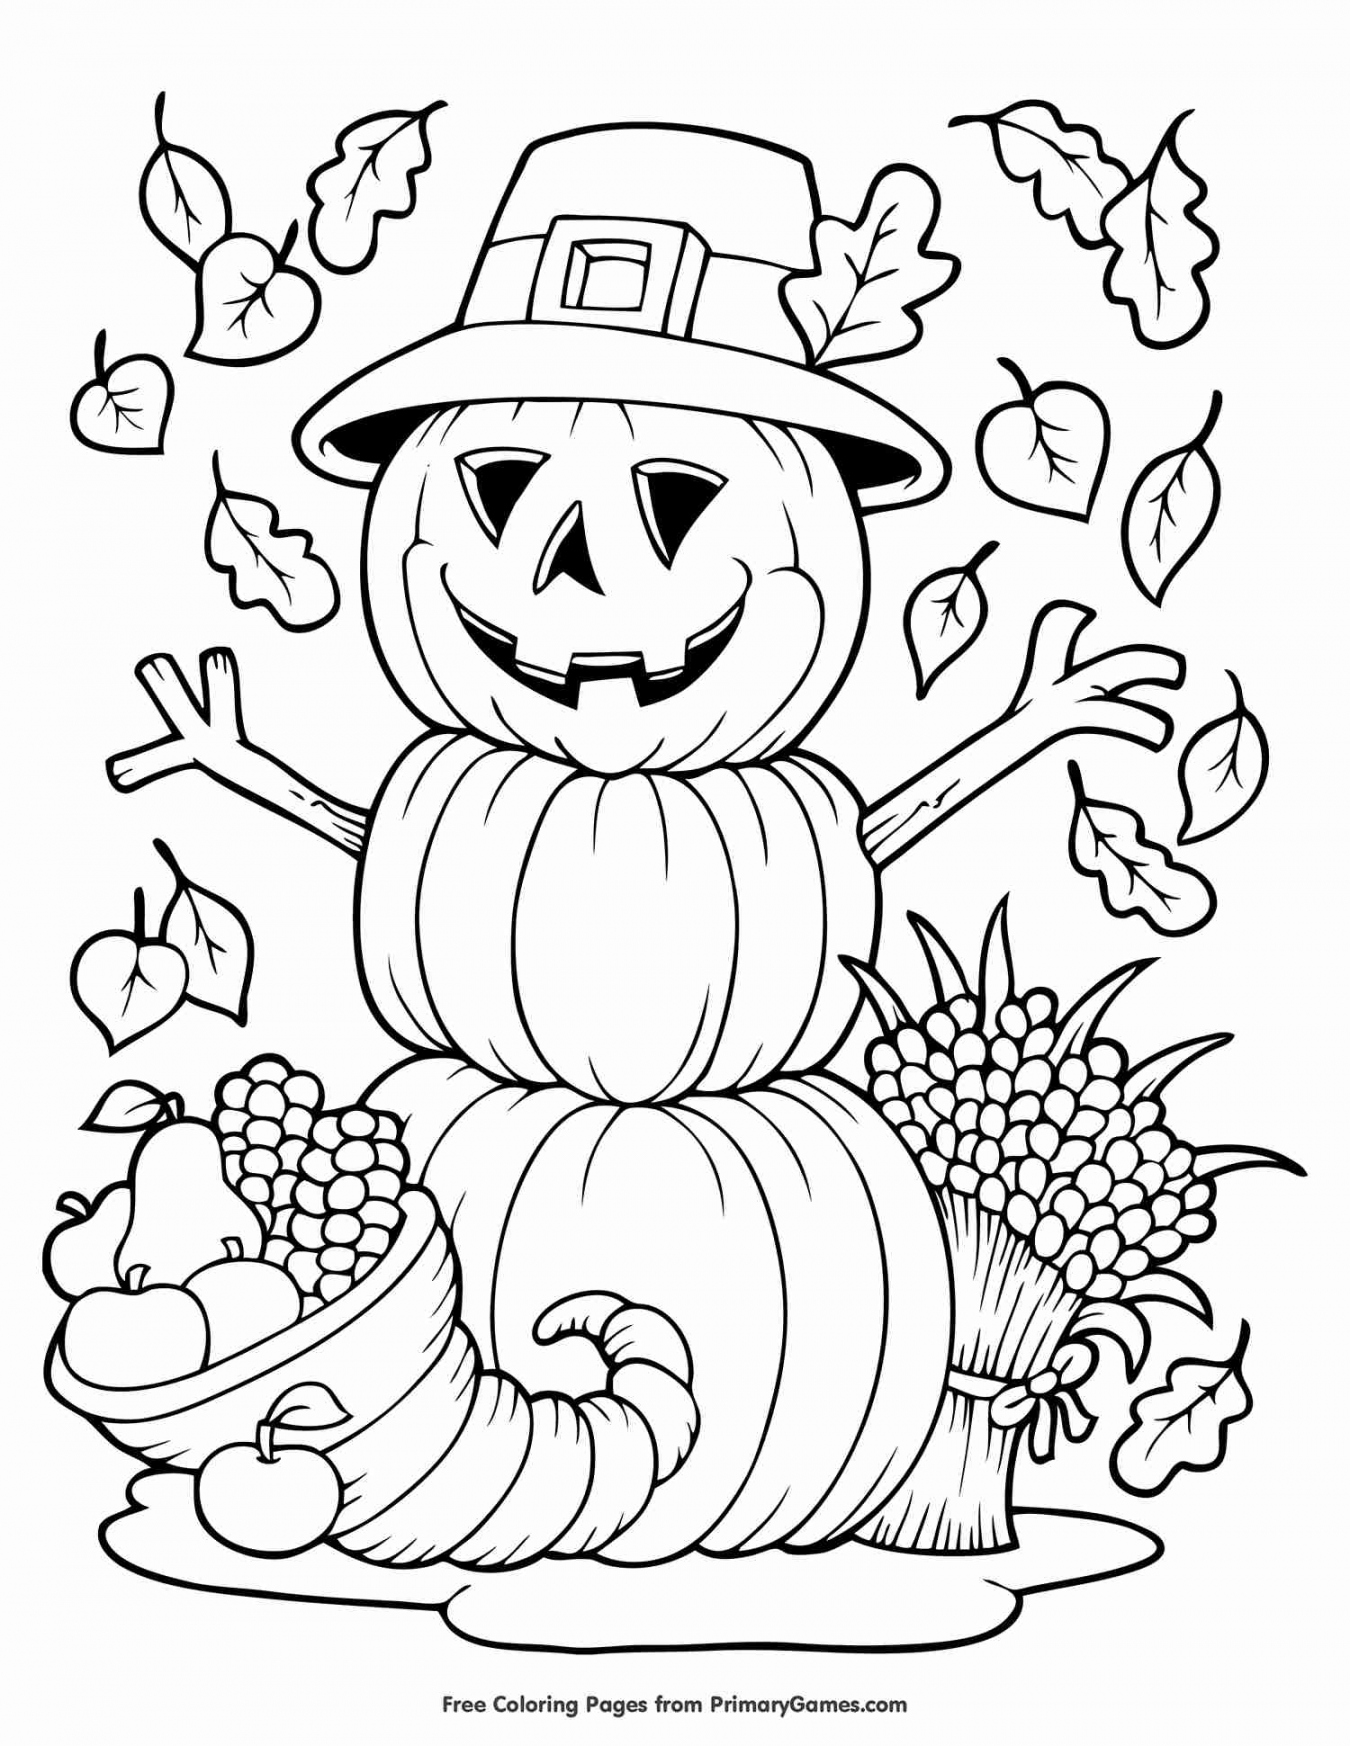 Free Fall Printable Coloring Pages - Printable -  Places to Find Free Autumn and Fall Coloring Pages